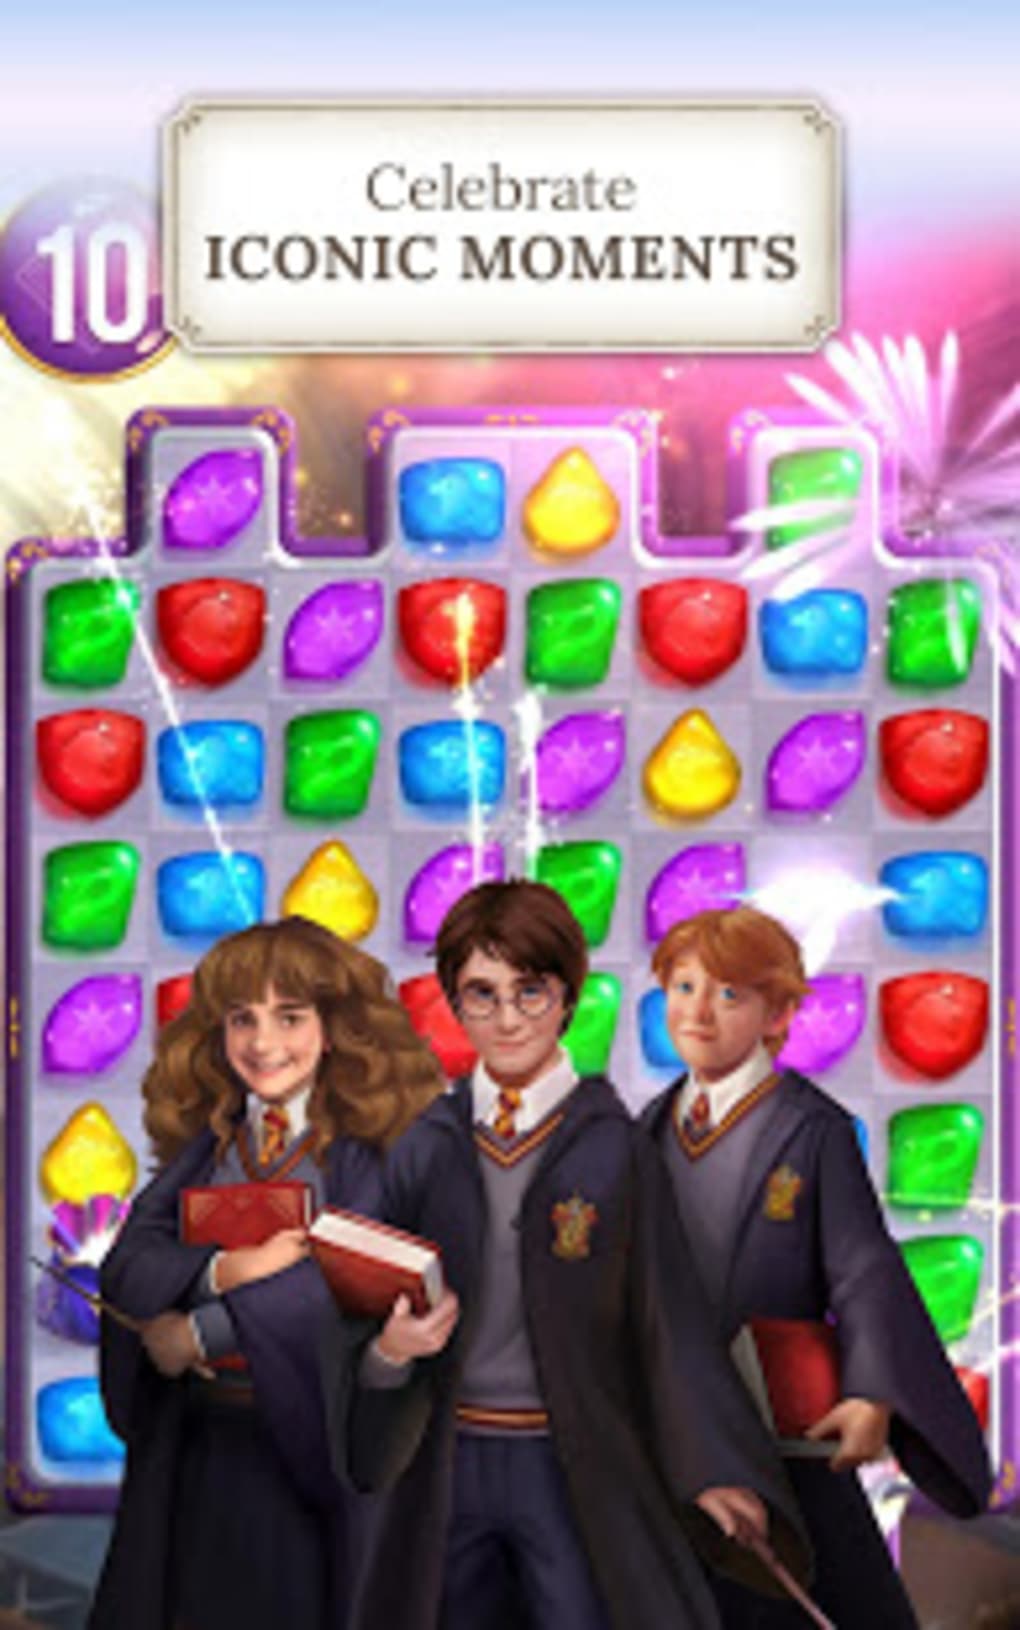 harry potter: puzzles and spells how to play